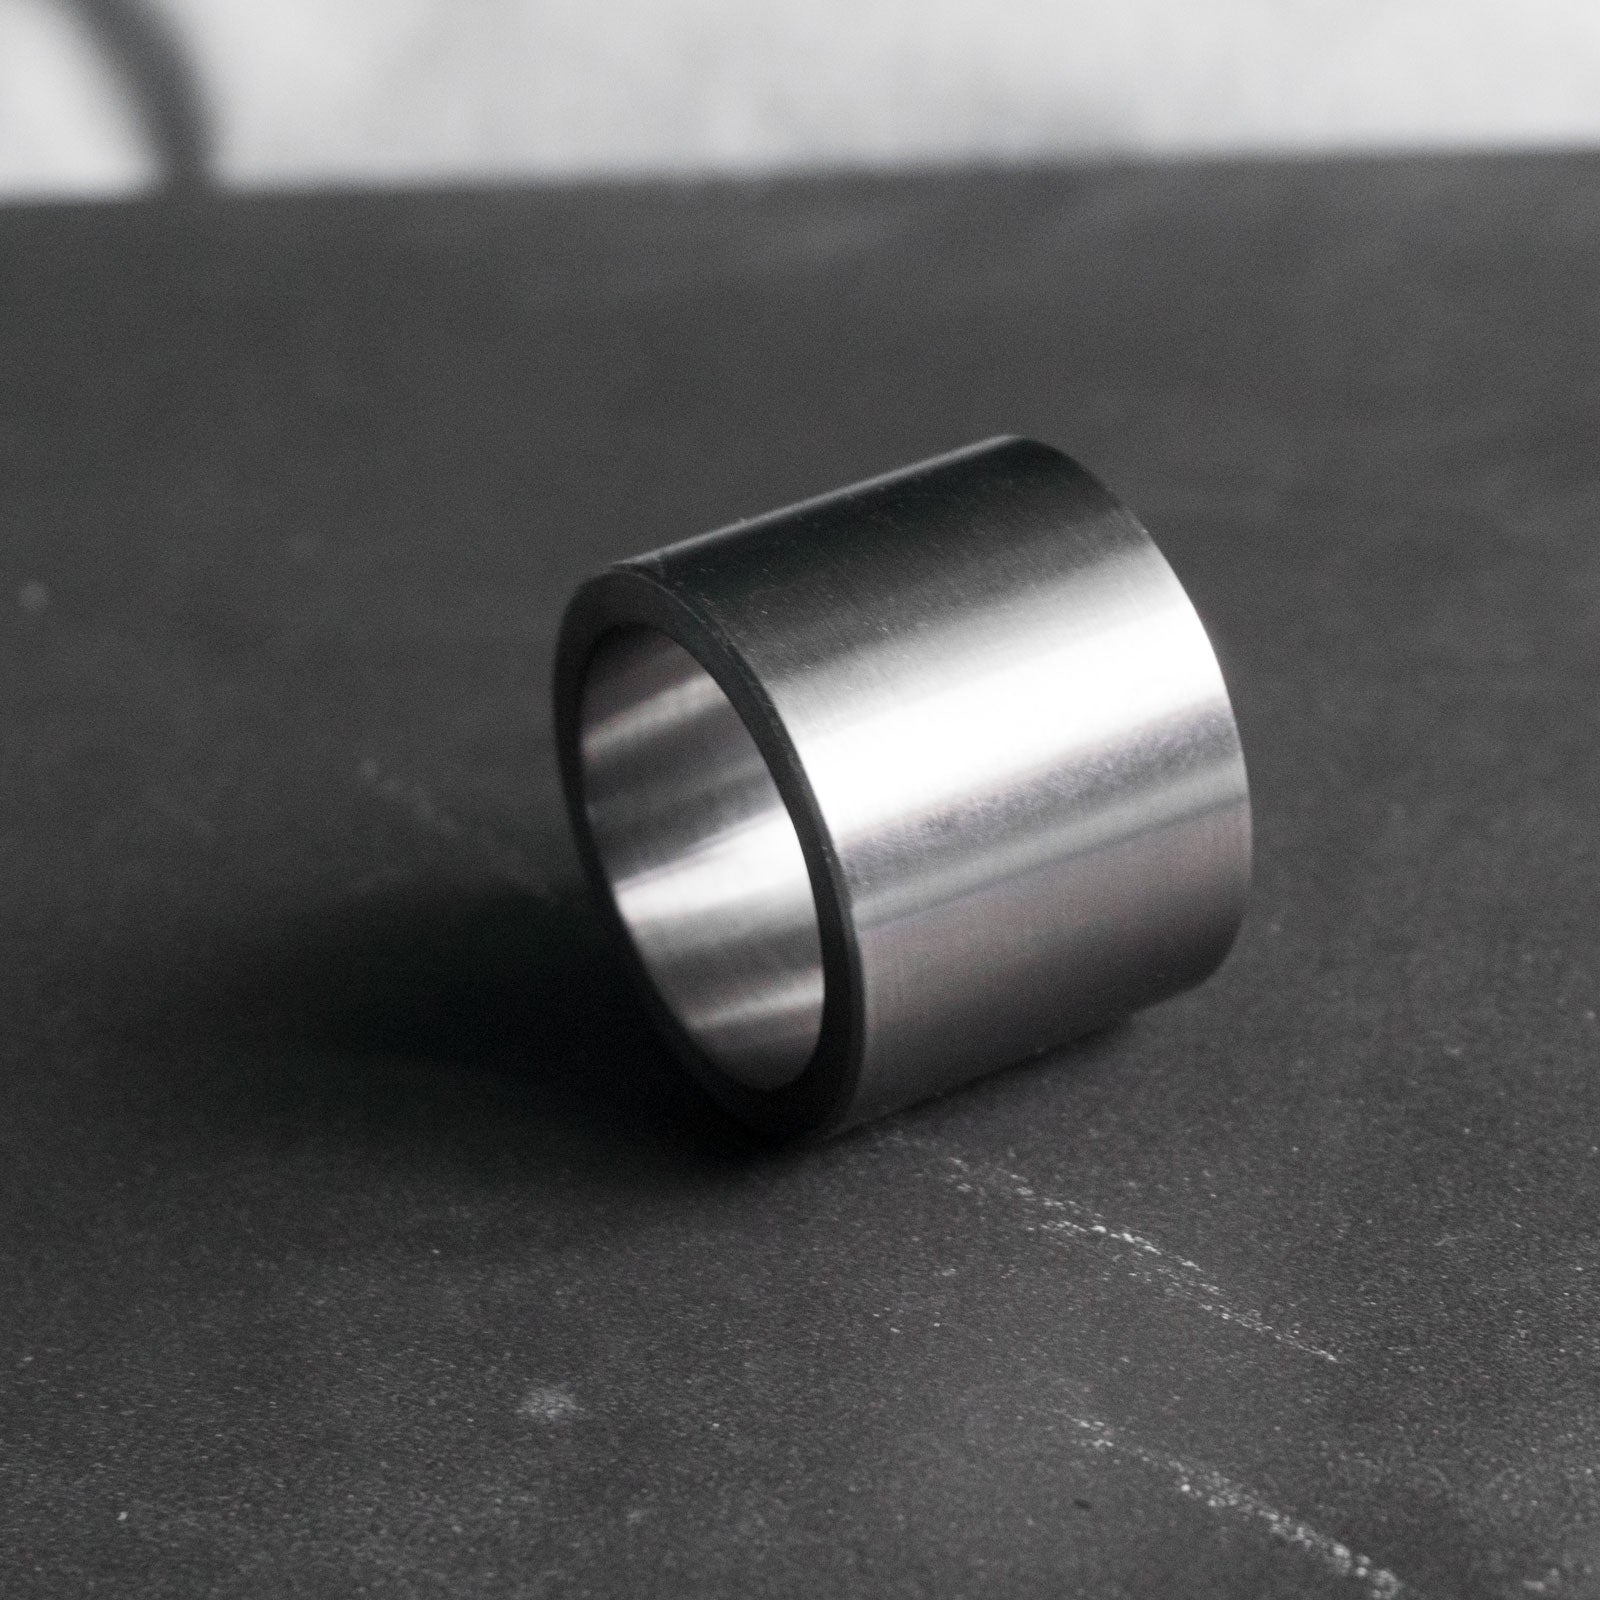 This is Bastion, a minimalist and imposing ring, handcrafted from pure tantalum, a rare, everlasting metal with a dark grey hue.